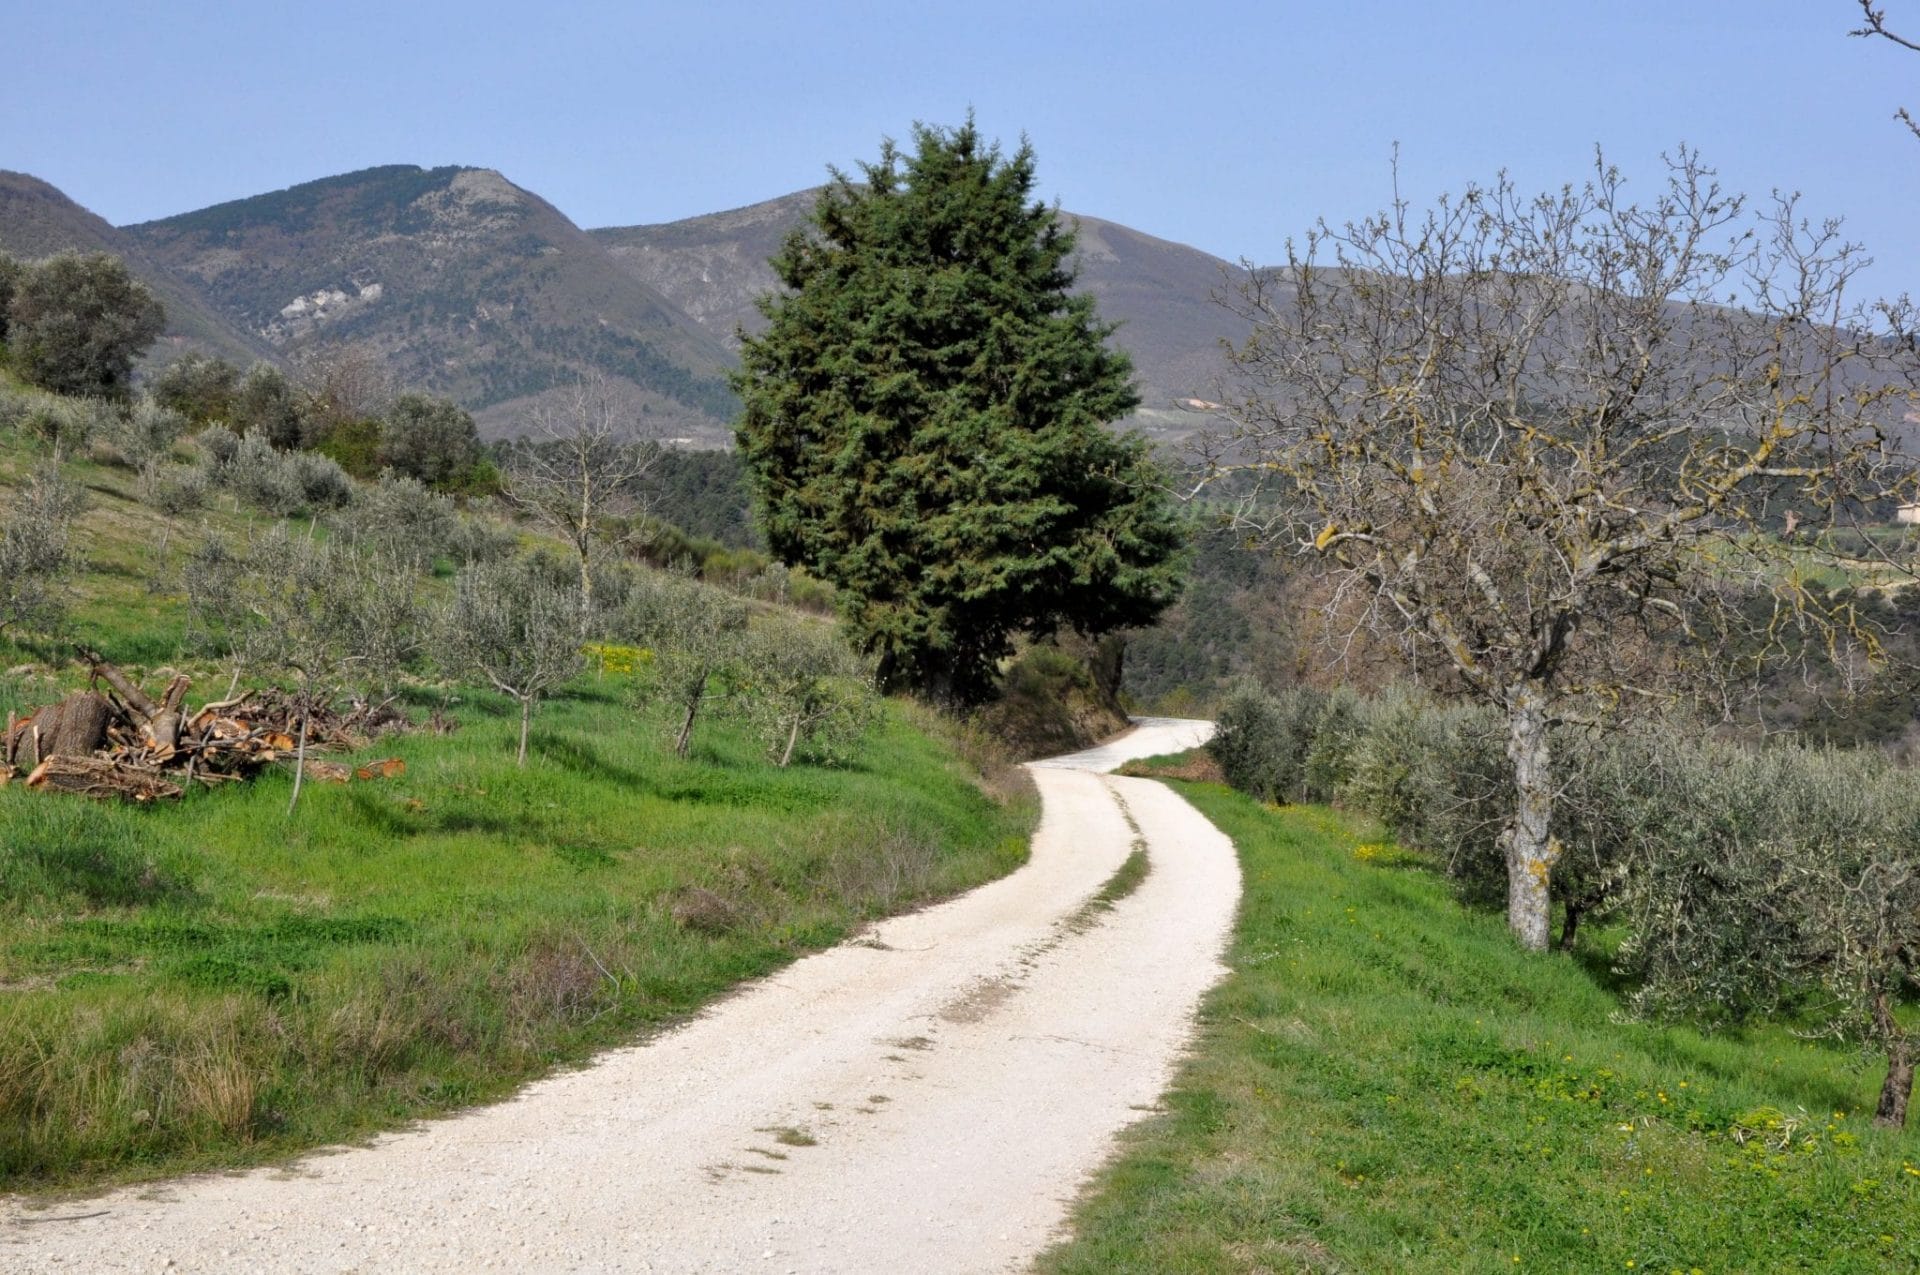 Roads in Italy's countryside can be difficult!